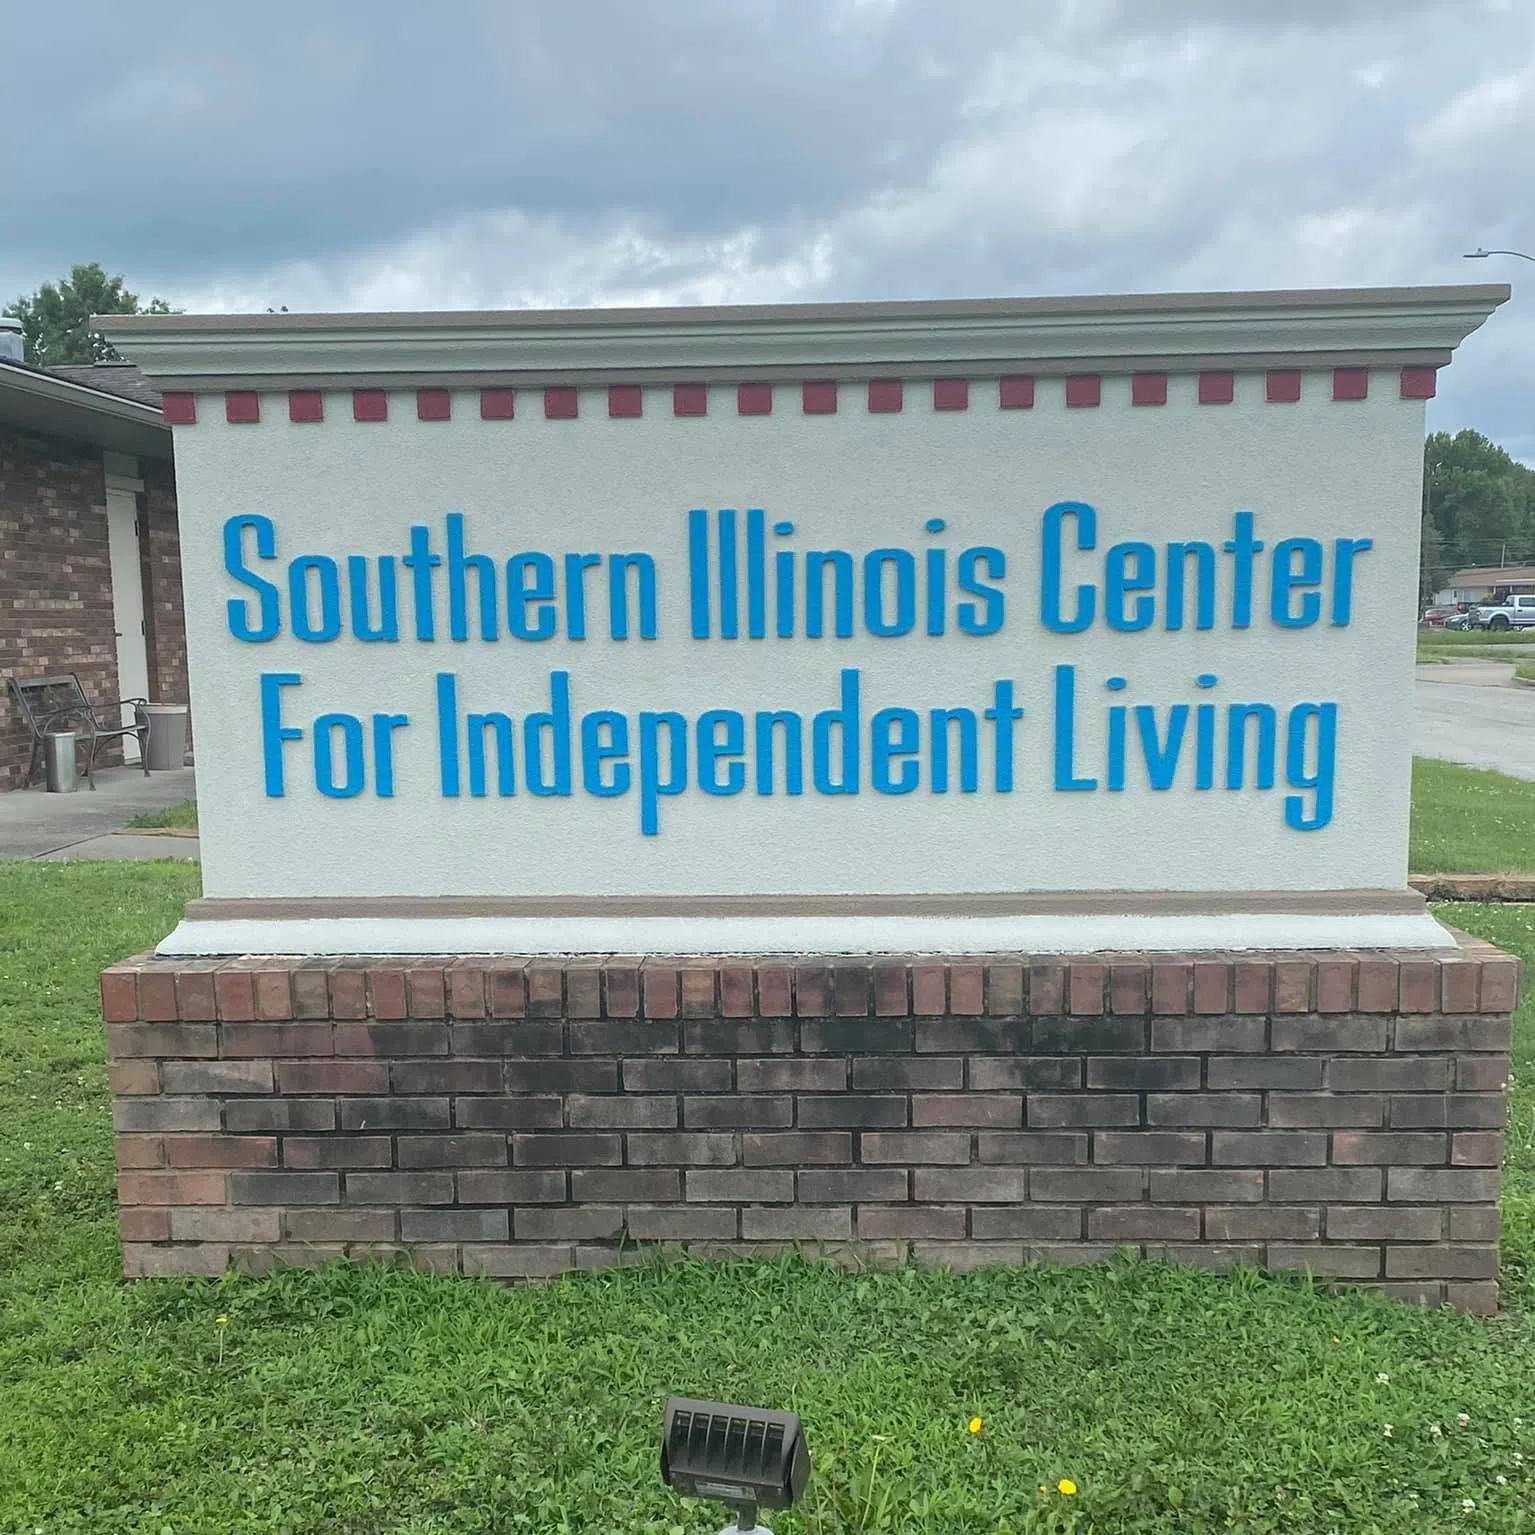 Southern Illinois Center for Independent Living in Metropolis